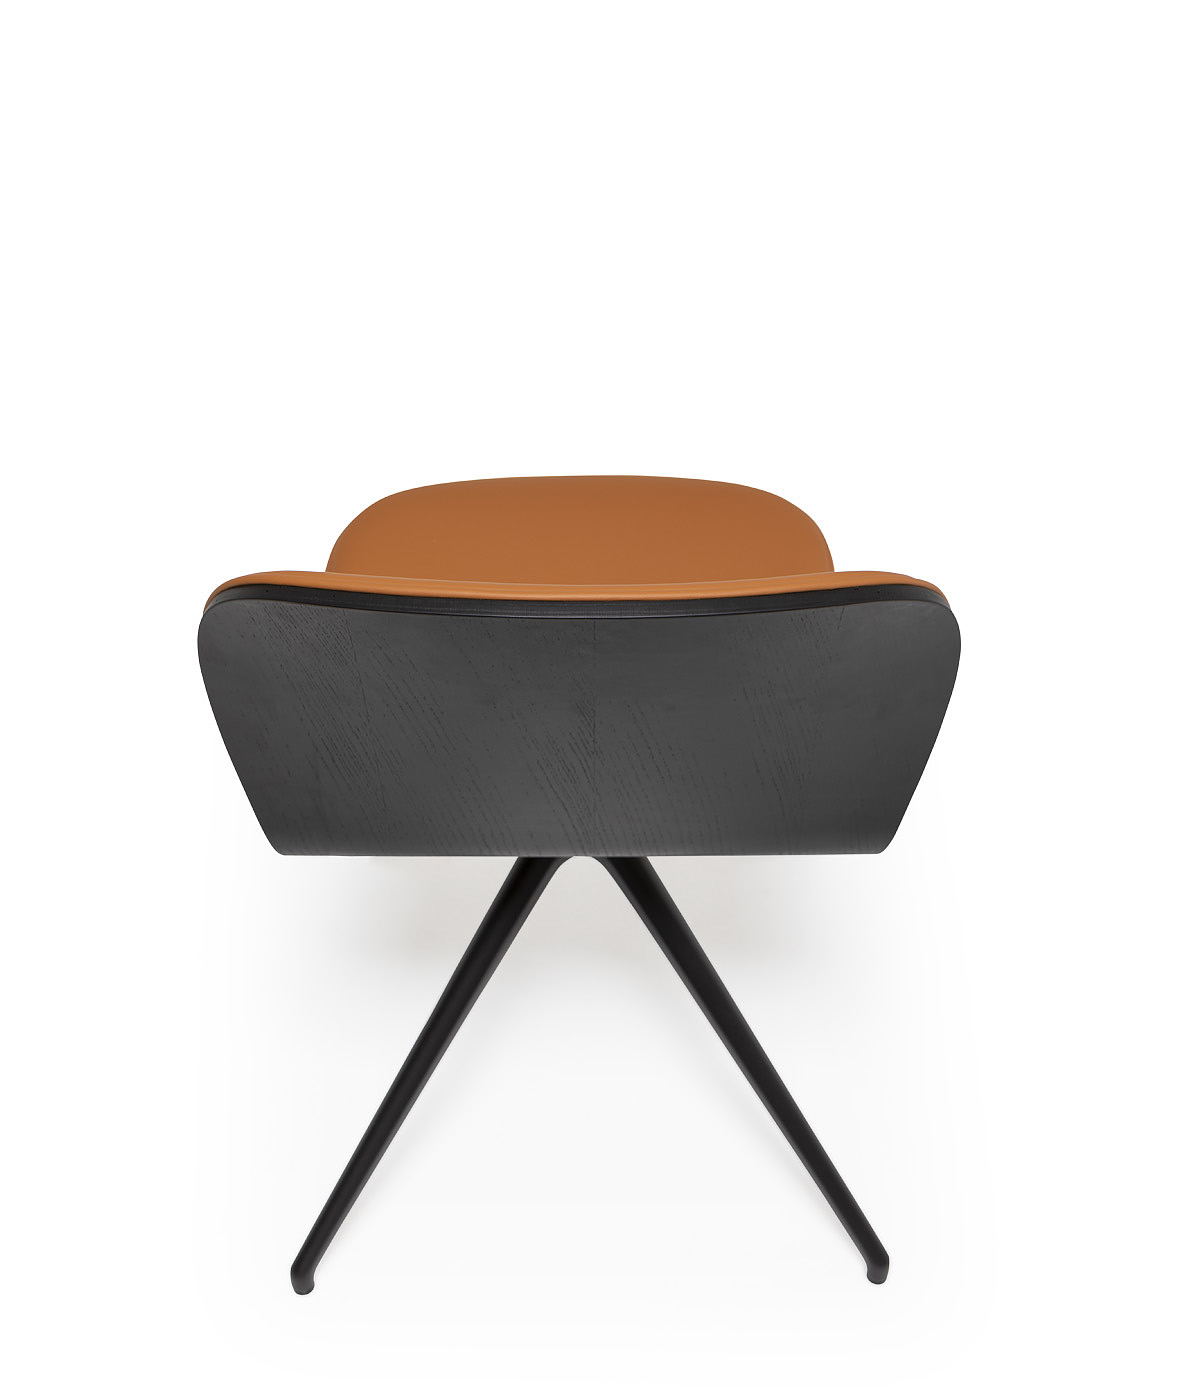 Ona chair with swivel base with 4 legs - Vergés